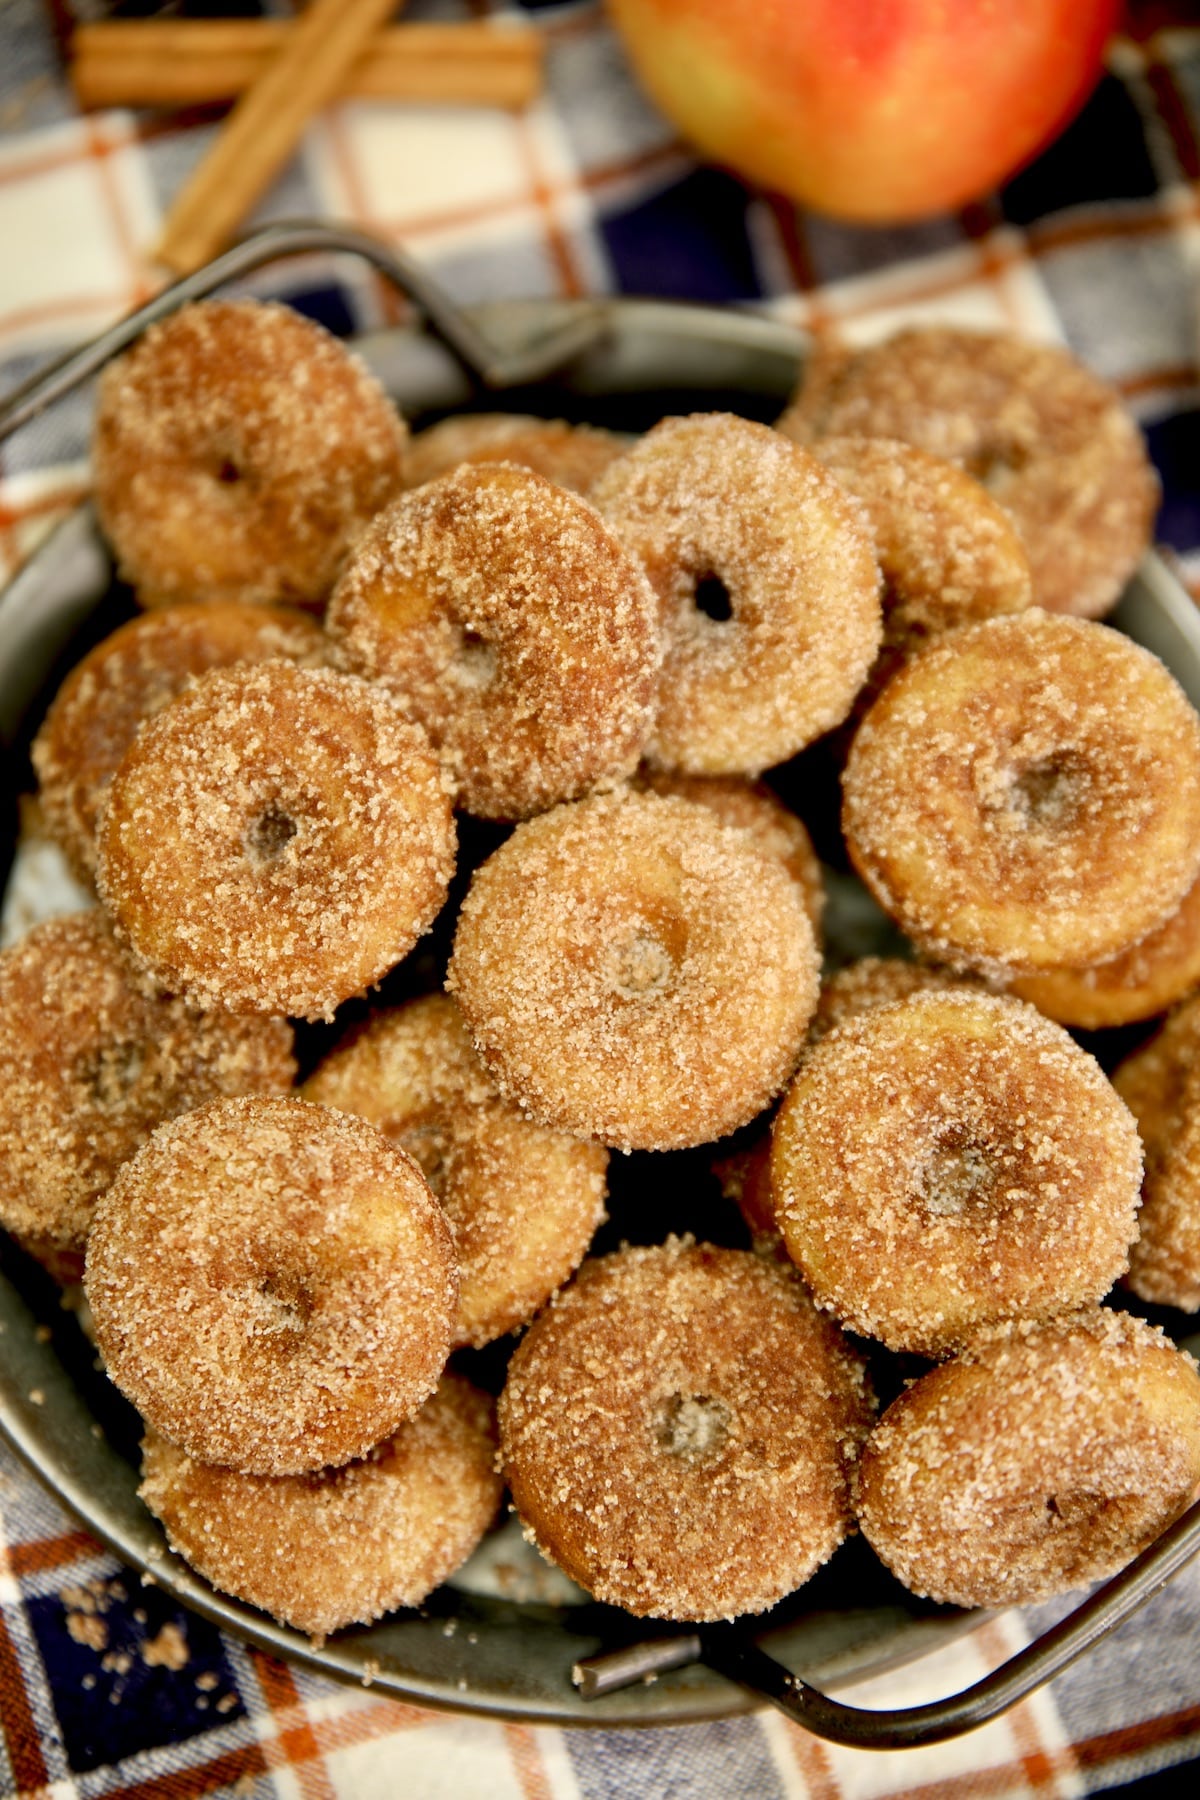 Platter of mini apple cider donuts with cinnamon and sugar coating.